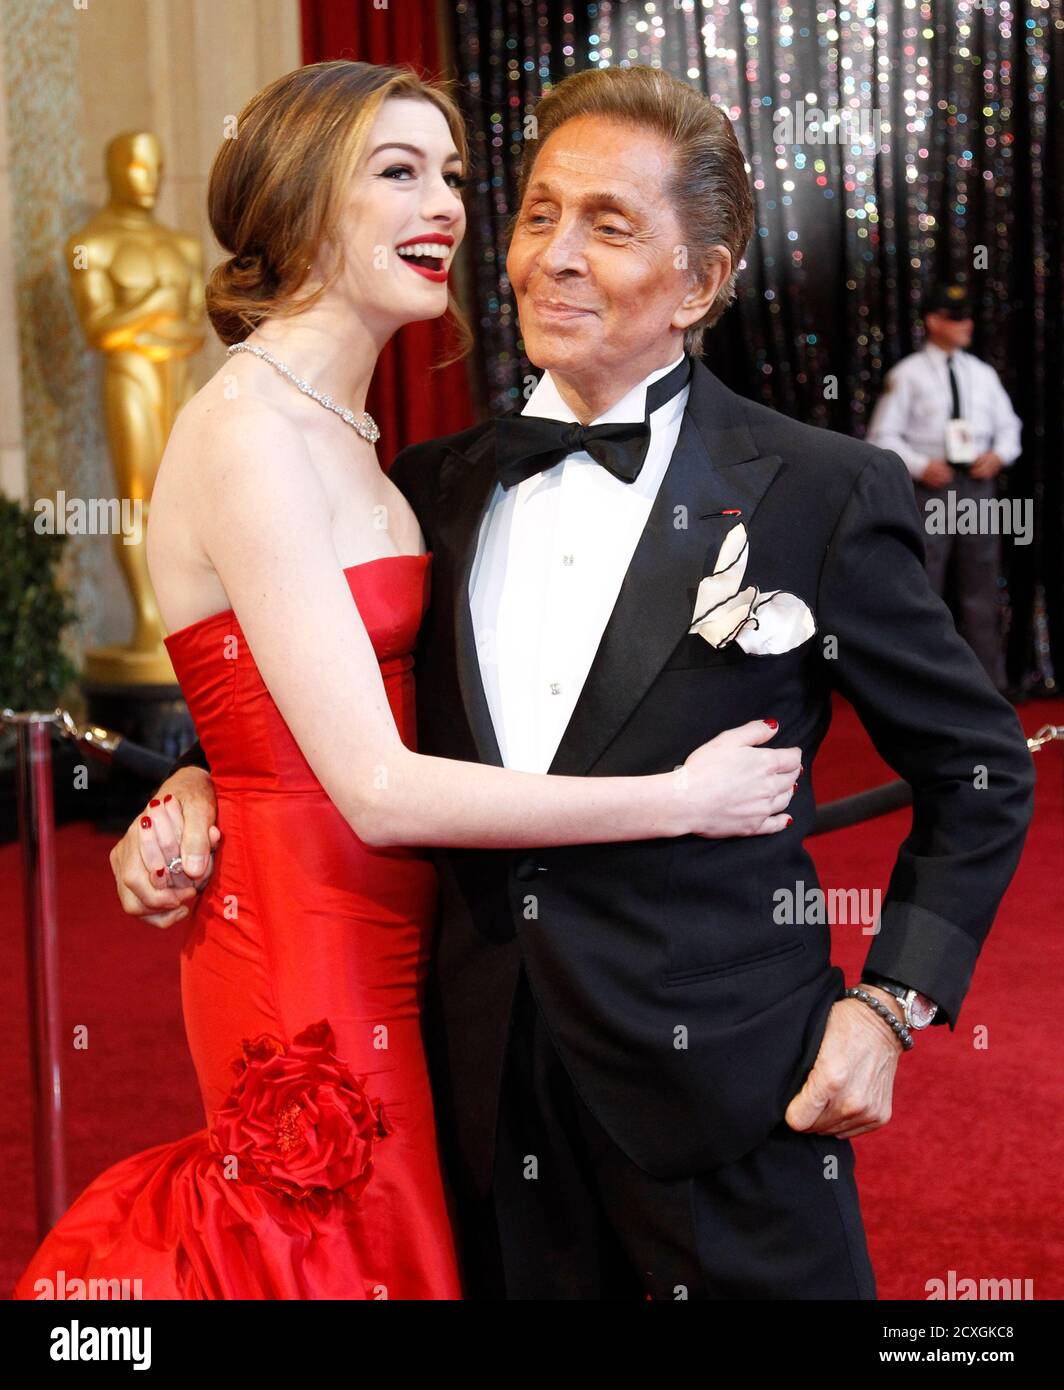 Actress and co-host Anne Hathaway poses with designer Valentino (R) at the  83rd Academy Awards in Hollywood, California, February 27, 2011. REUTERS/ Mario Anzuoni (UNITED STATES - Tags: ENTERTAINMENT FASHION)  (OSCARS-ARRIVALS Stock Photo -